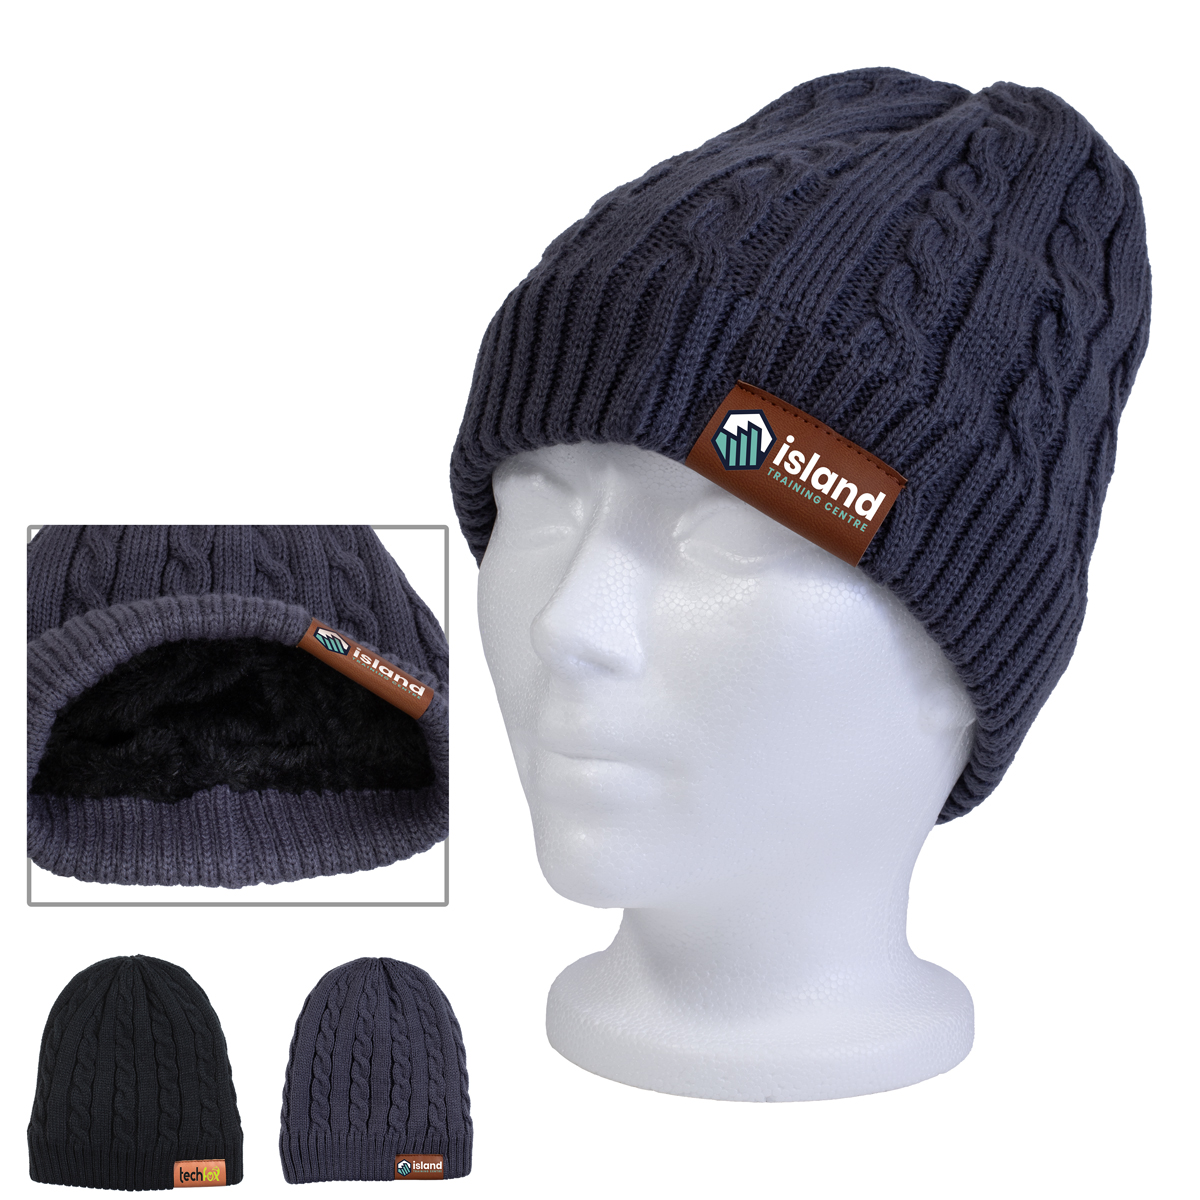 "THE COZY" Cable Knit Beanie With Fluffy Soft Lining